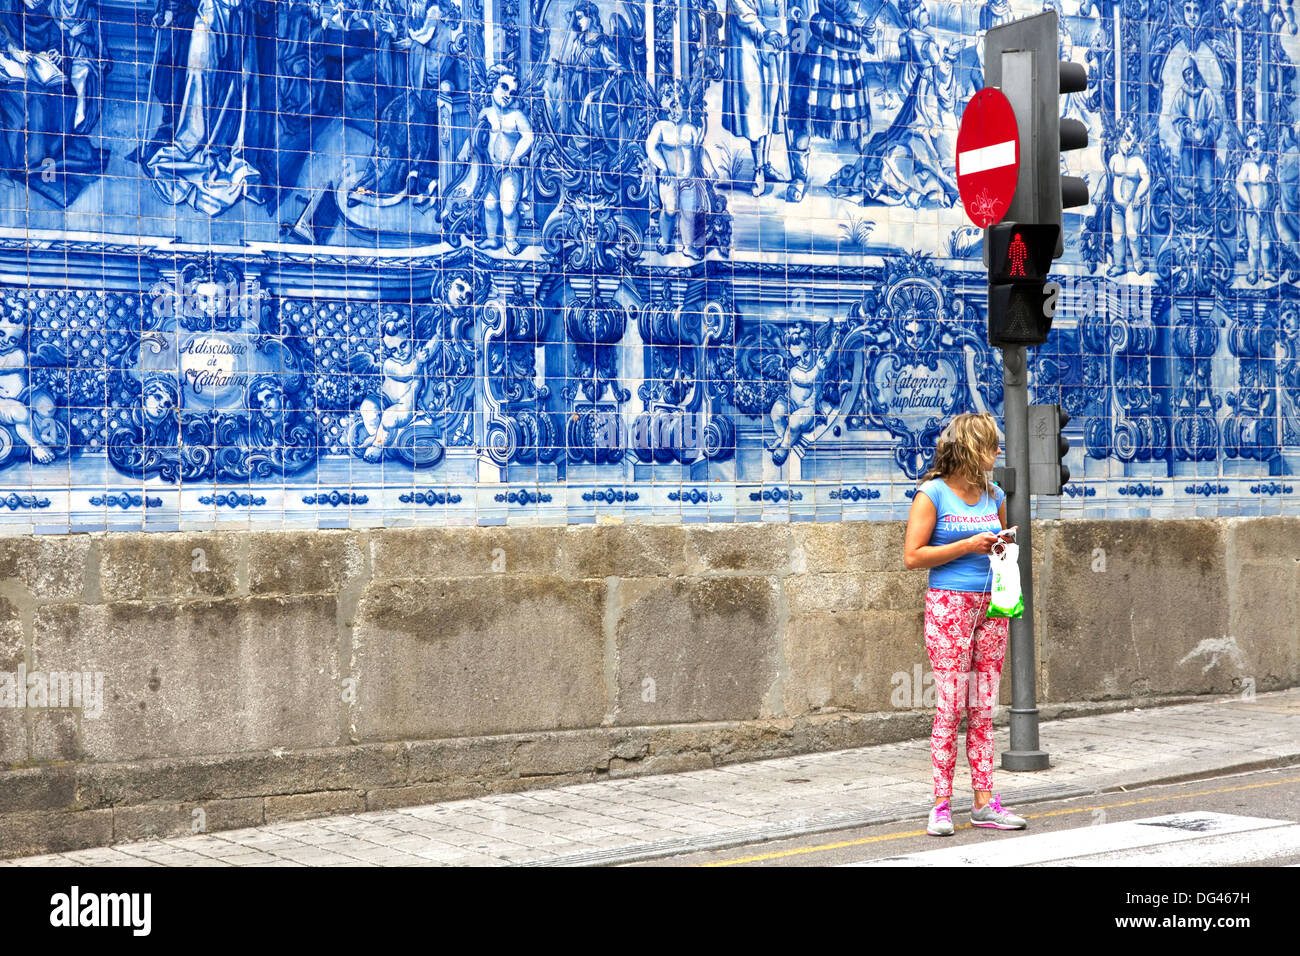 Young woman in front of blue azulejo tiling covering wall of Capela das Almas, town centre, Porto, Portugal Stock Photo